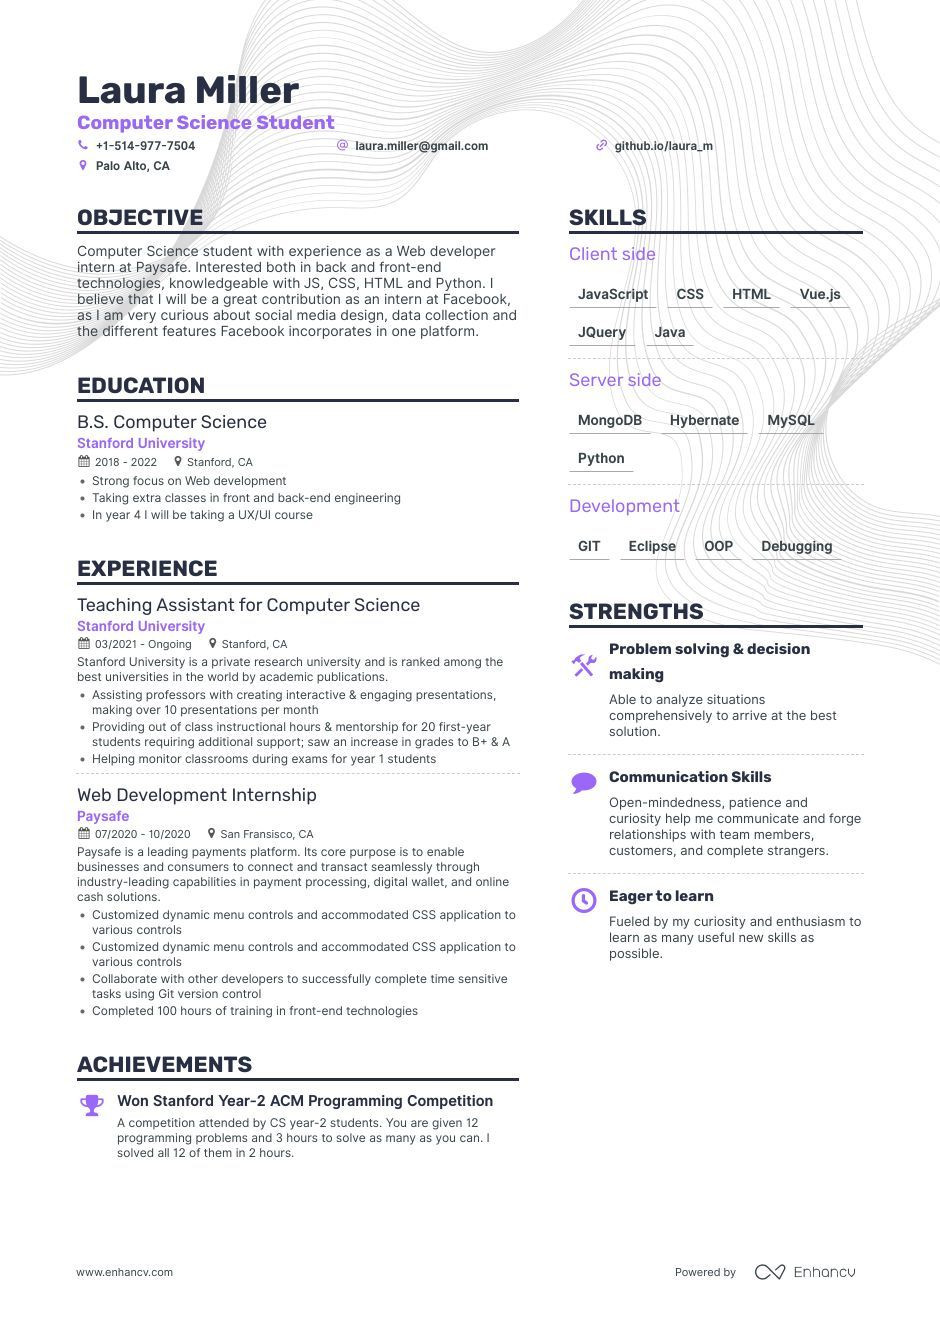 Sample Resume with Computer Science associate Degree Computer Science Resume Examples & Guide for 2022 (layout, Skills …